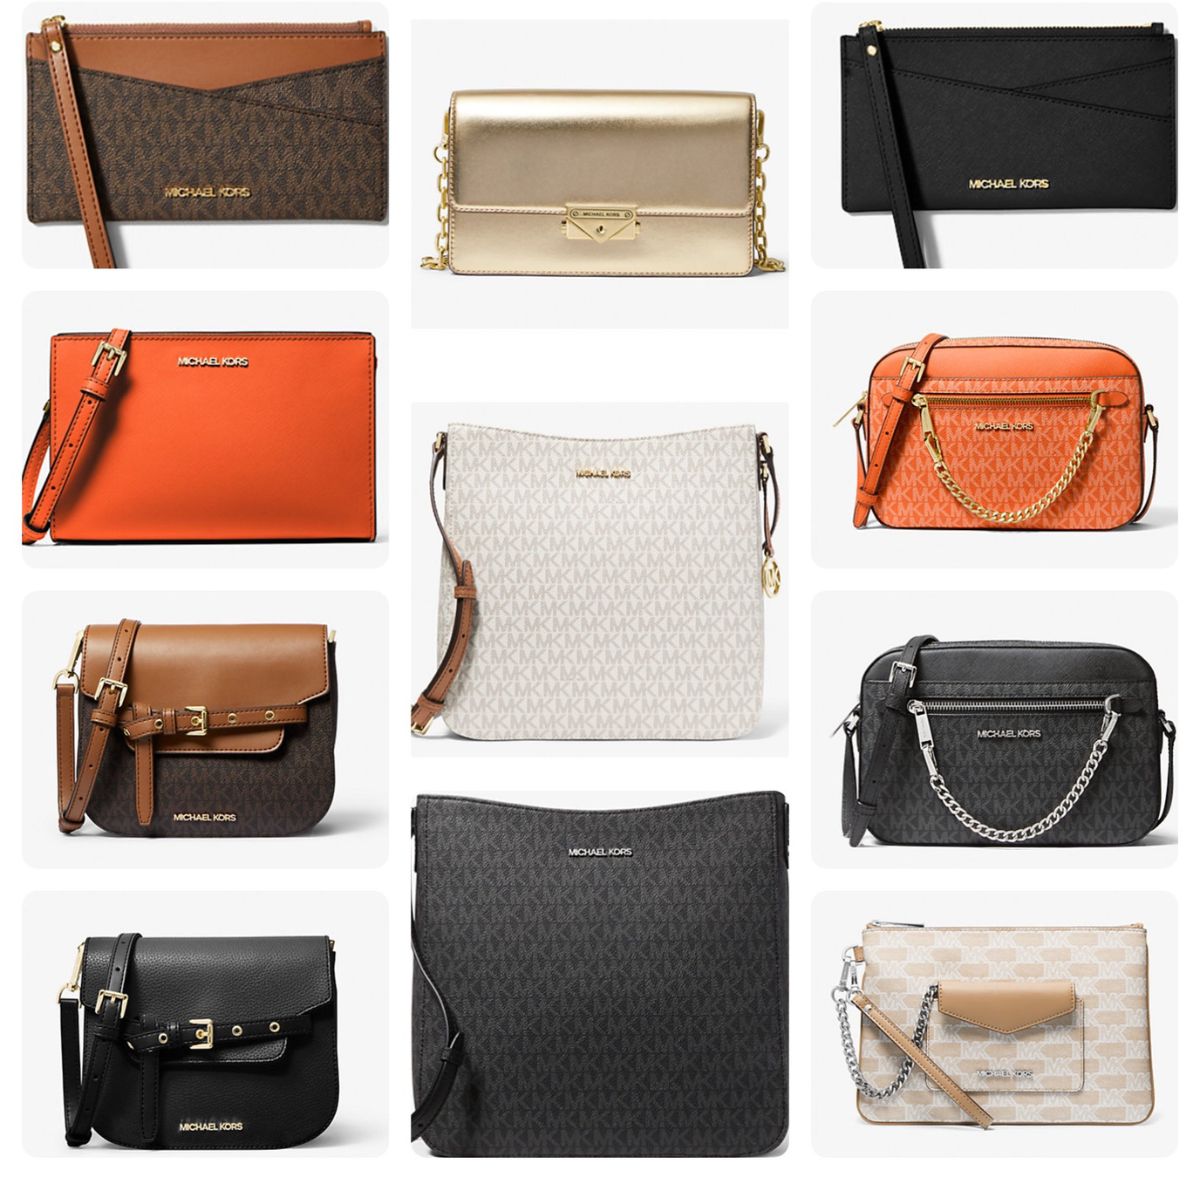 Extra 20% off at Michael Kors outlet, Handbags, wallets and wristlets as  low as $47+